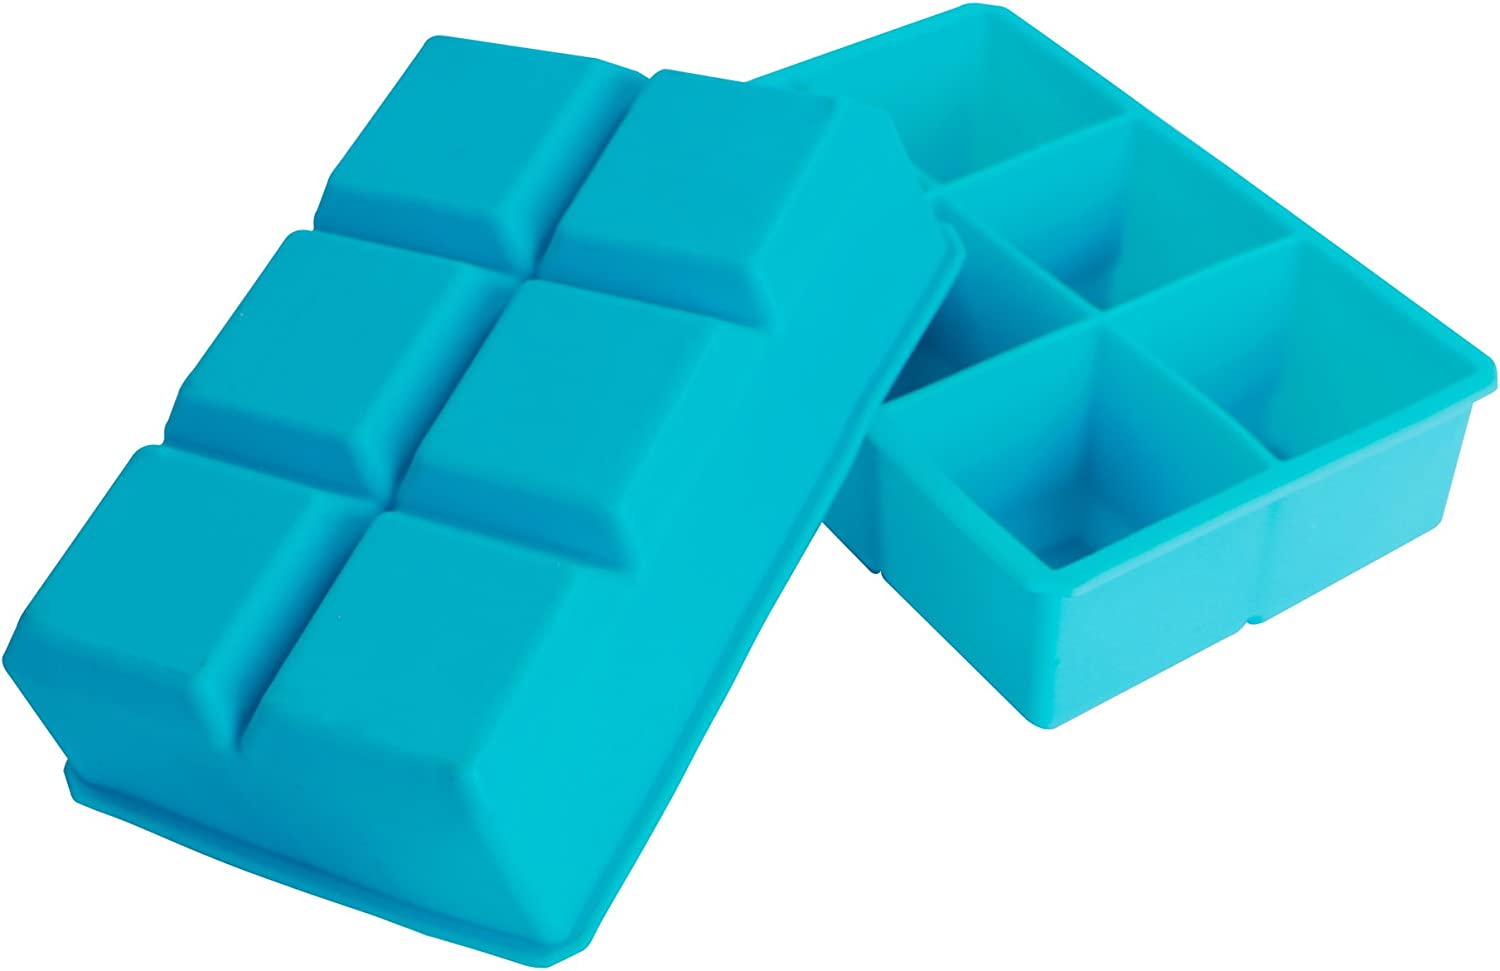 Webake 2 Inch Large Ice Cube Tray, Flexible Ice Mold Silicone Big Ice Cube  Trays for Whiskey Cocktails and Treats, BPA Free Blue Square Silicone Mold